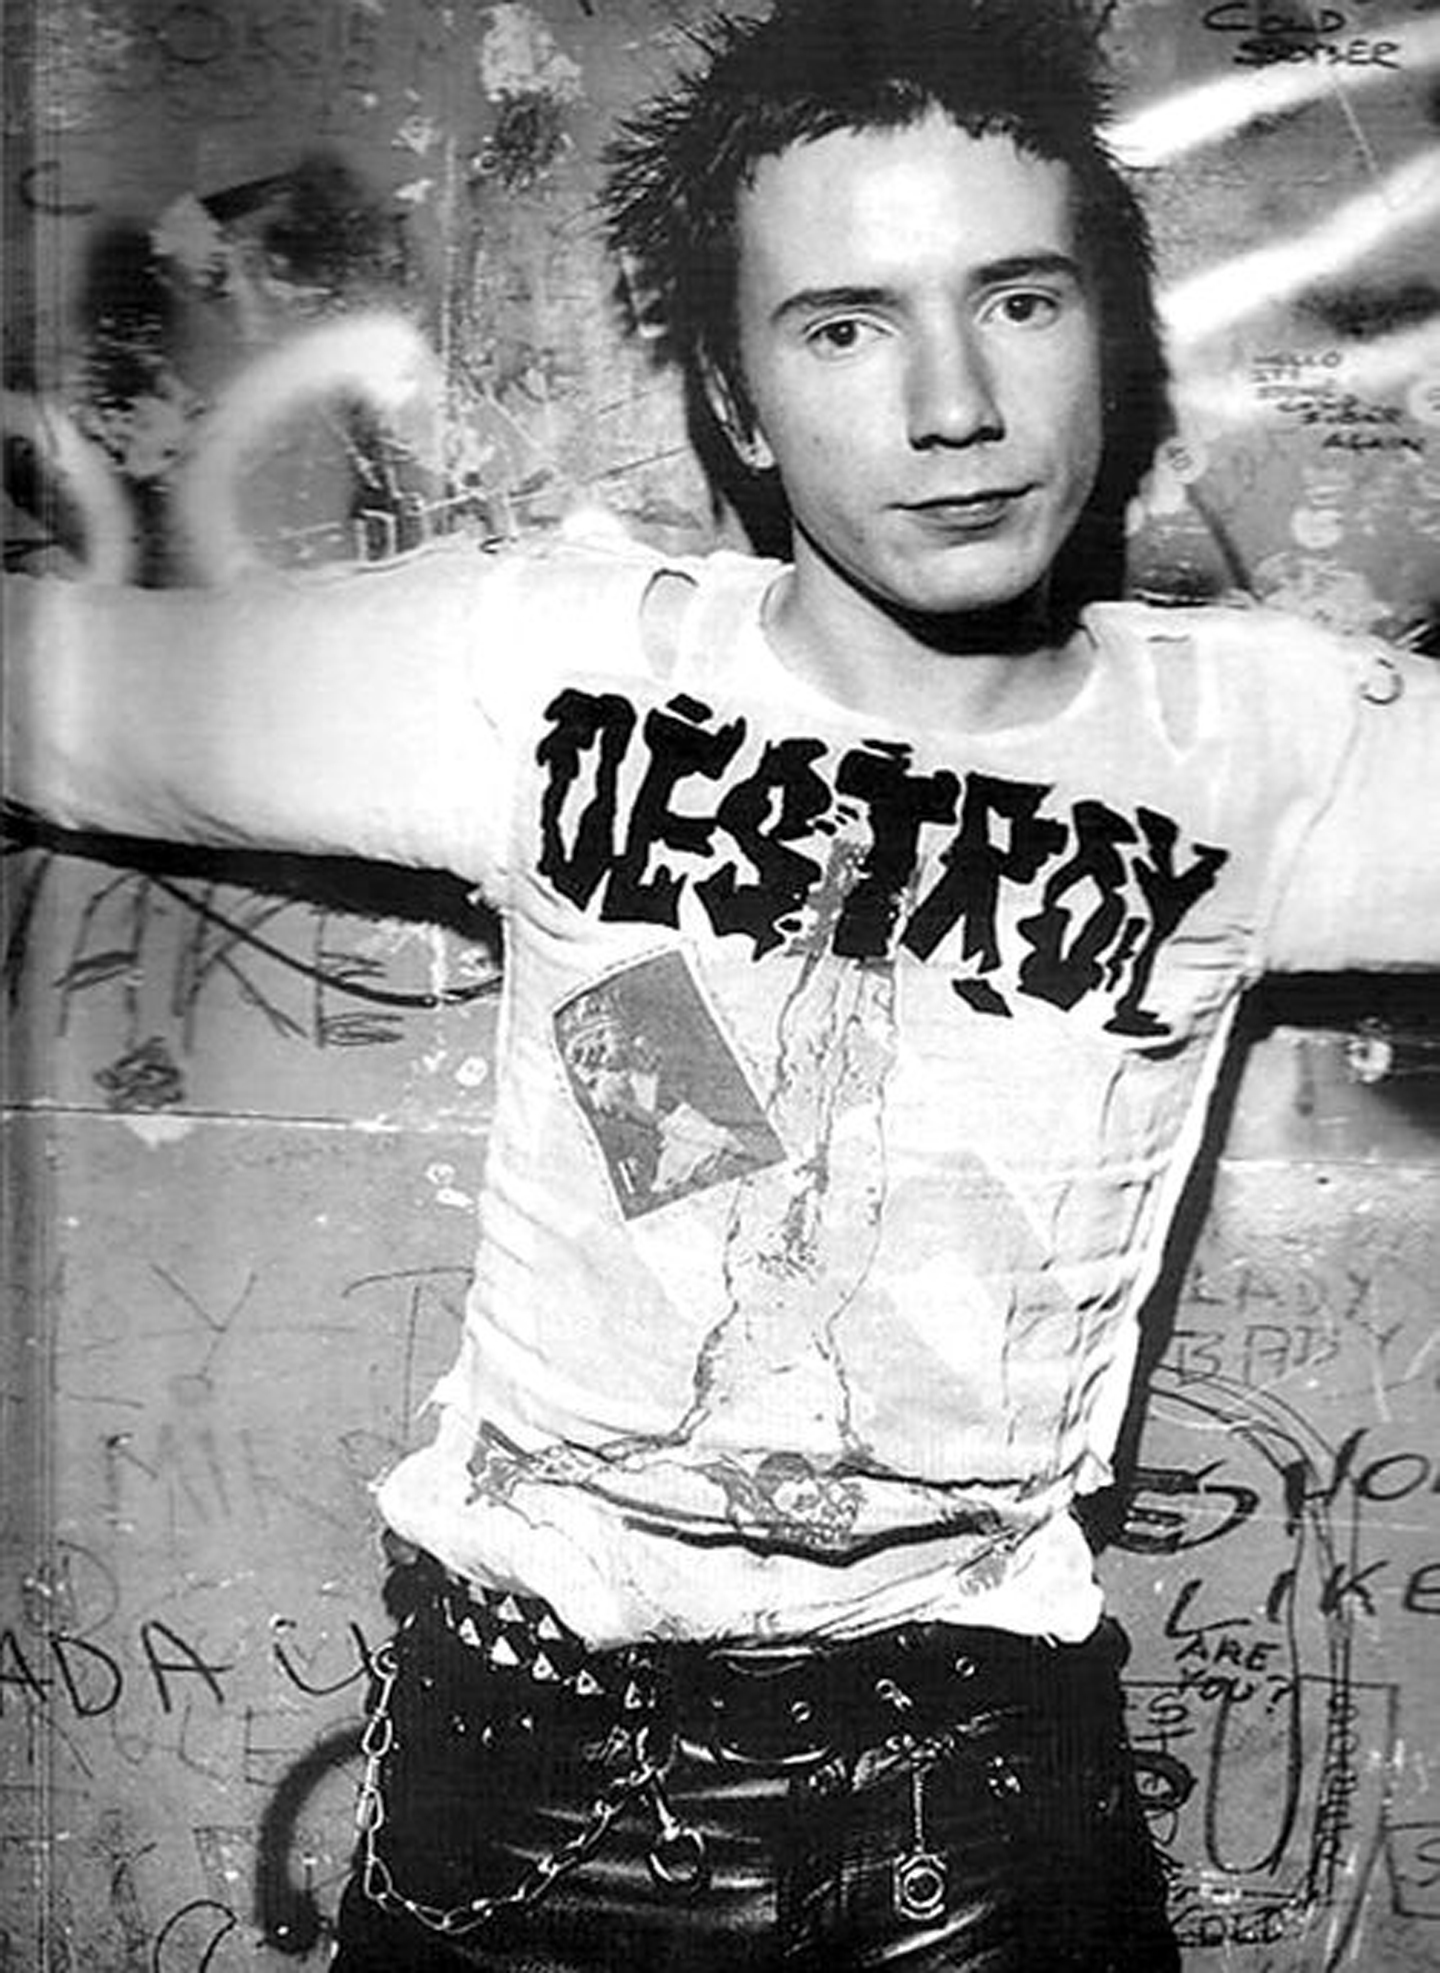 The famous Westwood's ripped T-shirt with the word Destroy on it, worn by Sex Pistols’ Johnny Rotten